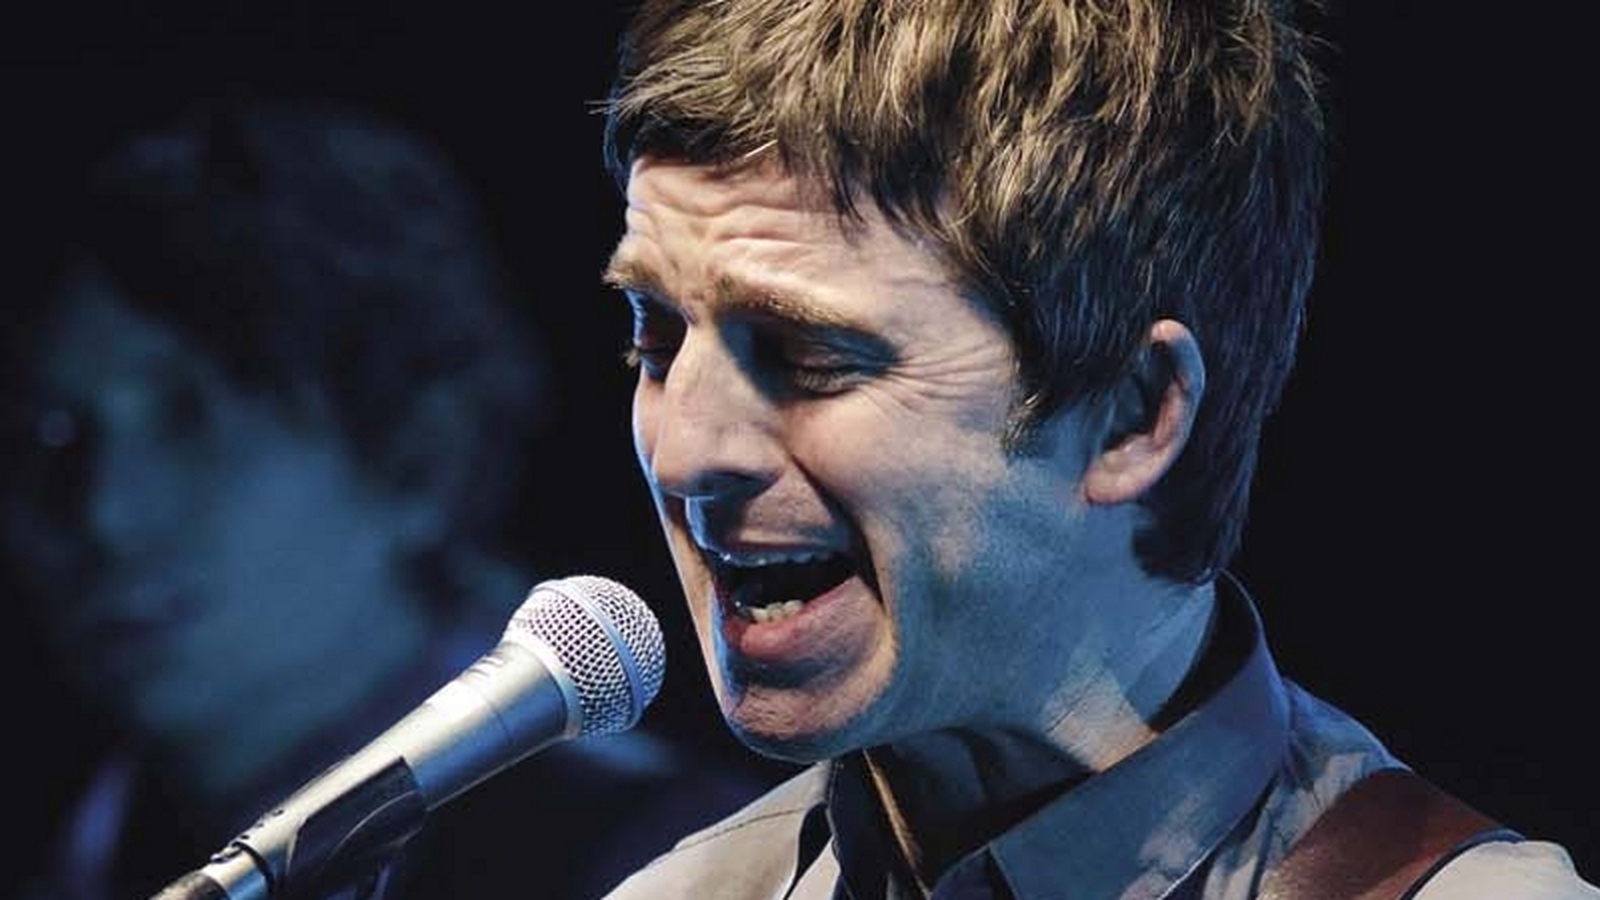 Saturday Night Show Noel Gallagher Tickets - Singing , HD Wallpaper & Backgrounds